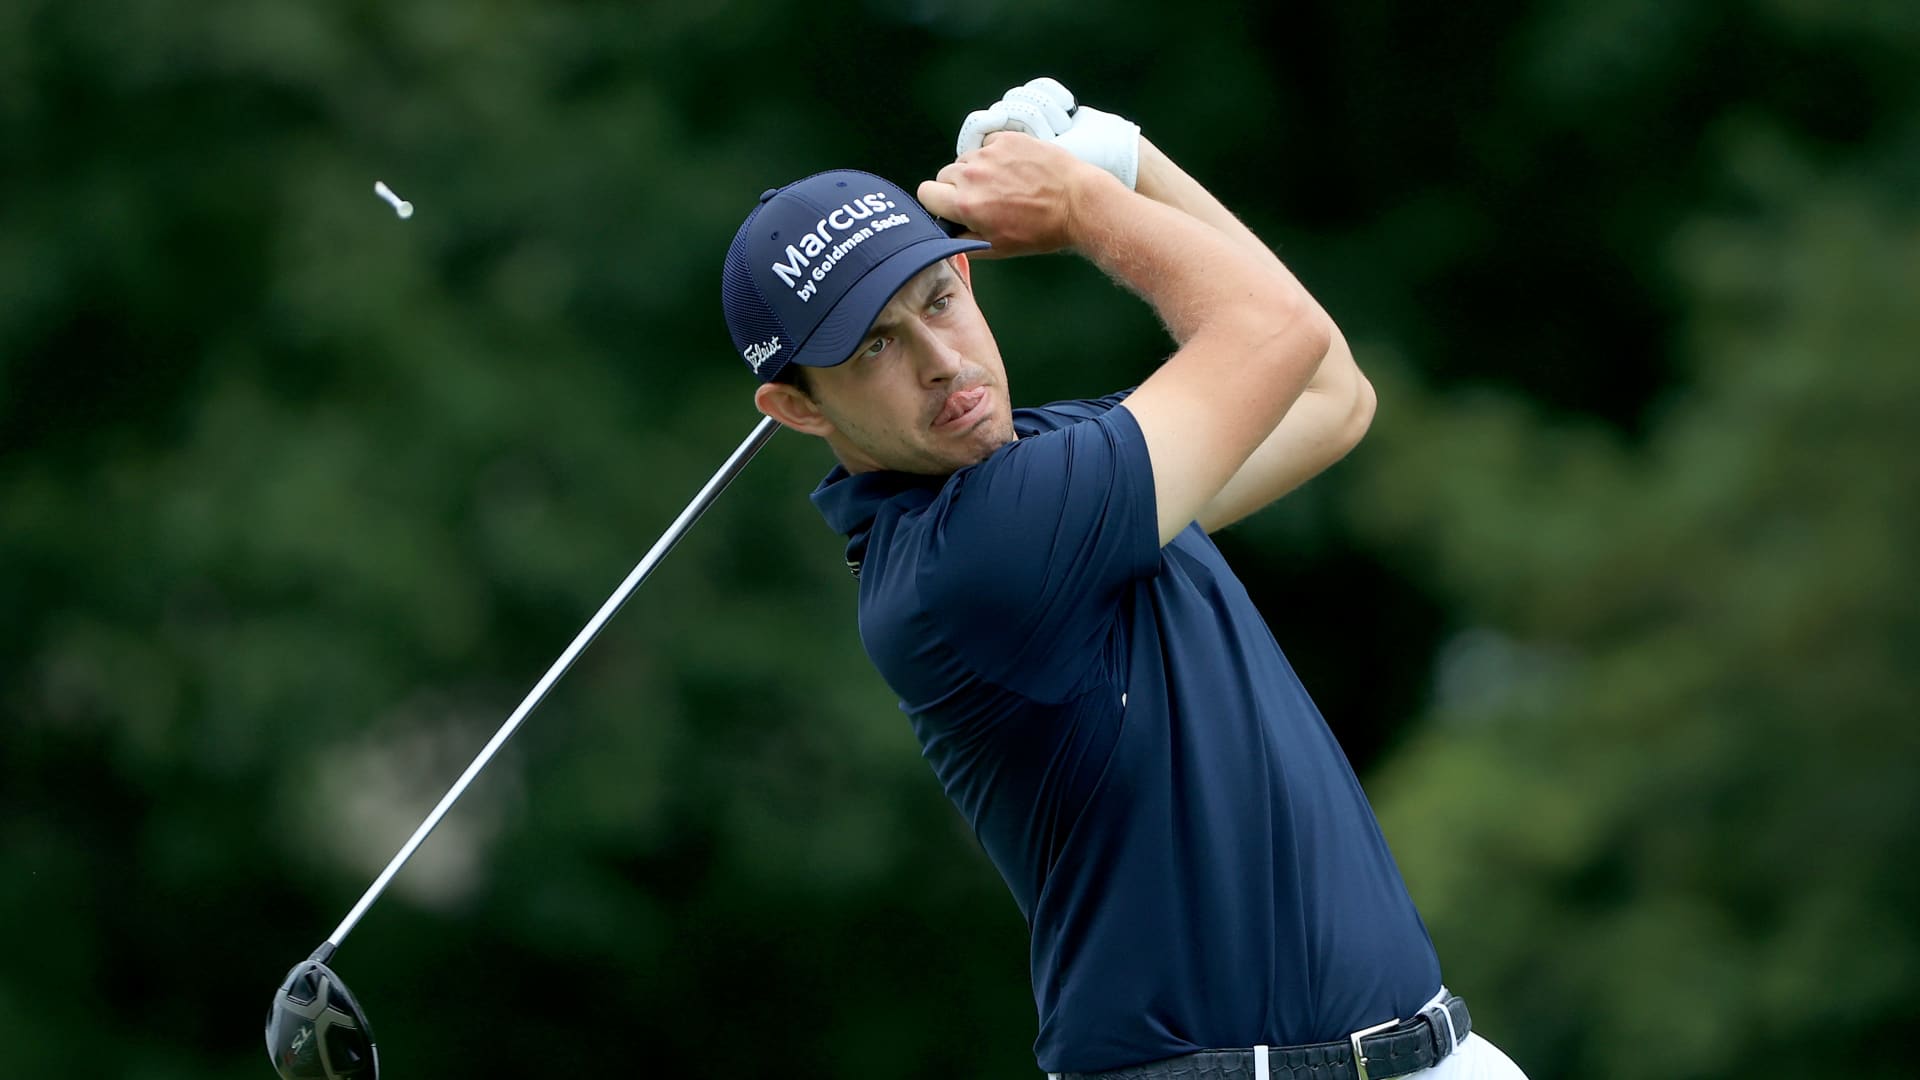 Goldman Sachs paid pro golfer Patrick Cantlay more than $1 million annually, sources say